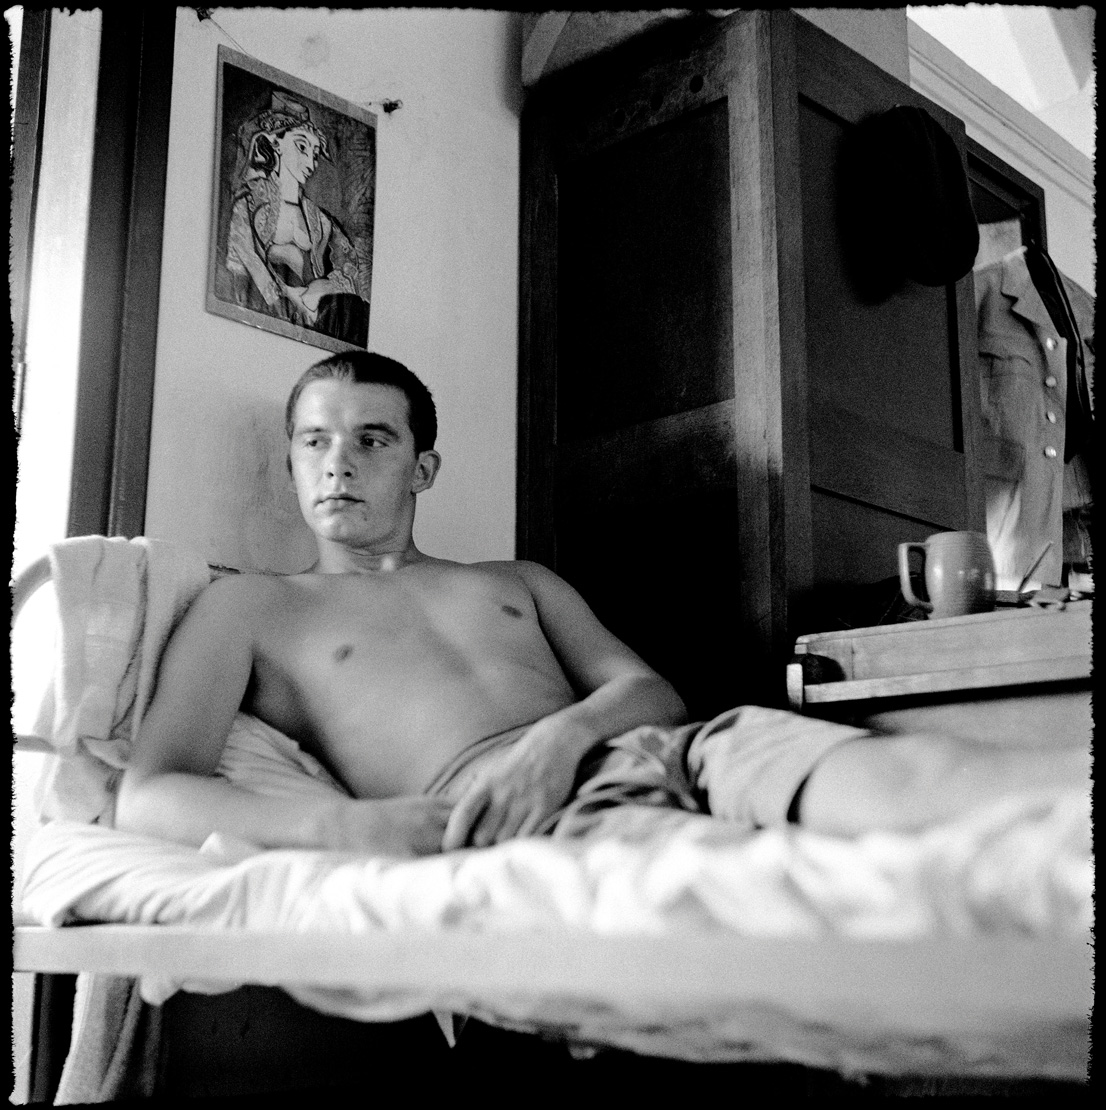 Self-portrait during National Service in Singapore by David Bailey, 1957 © David Bailey